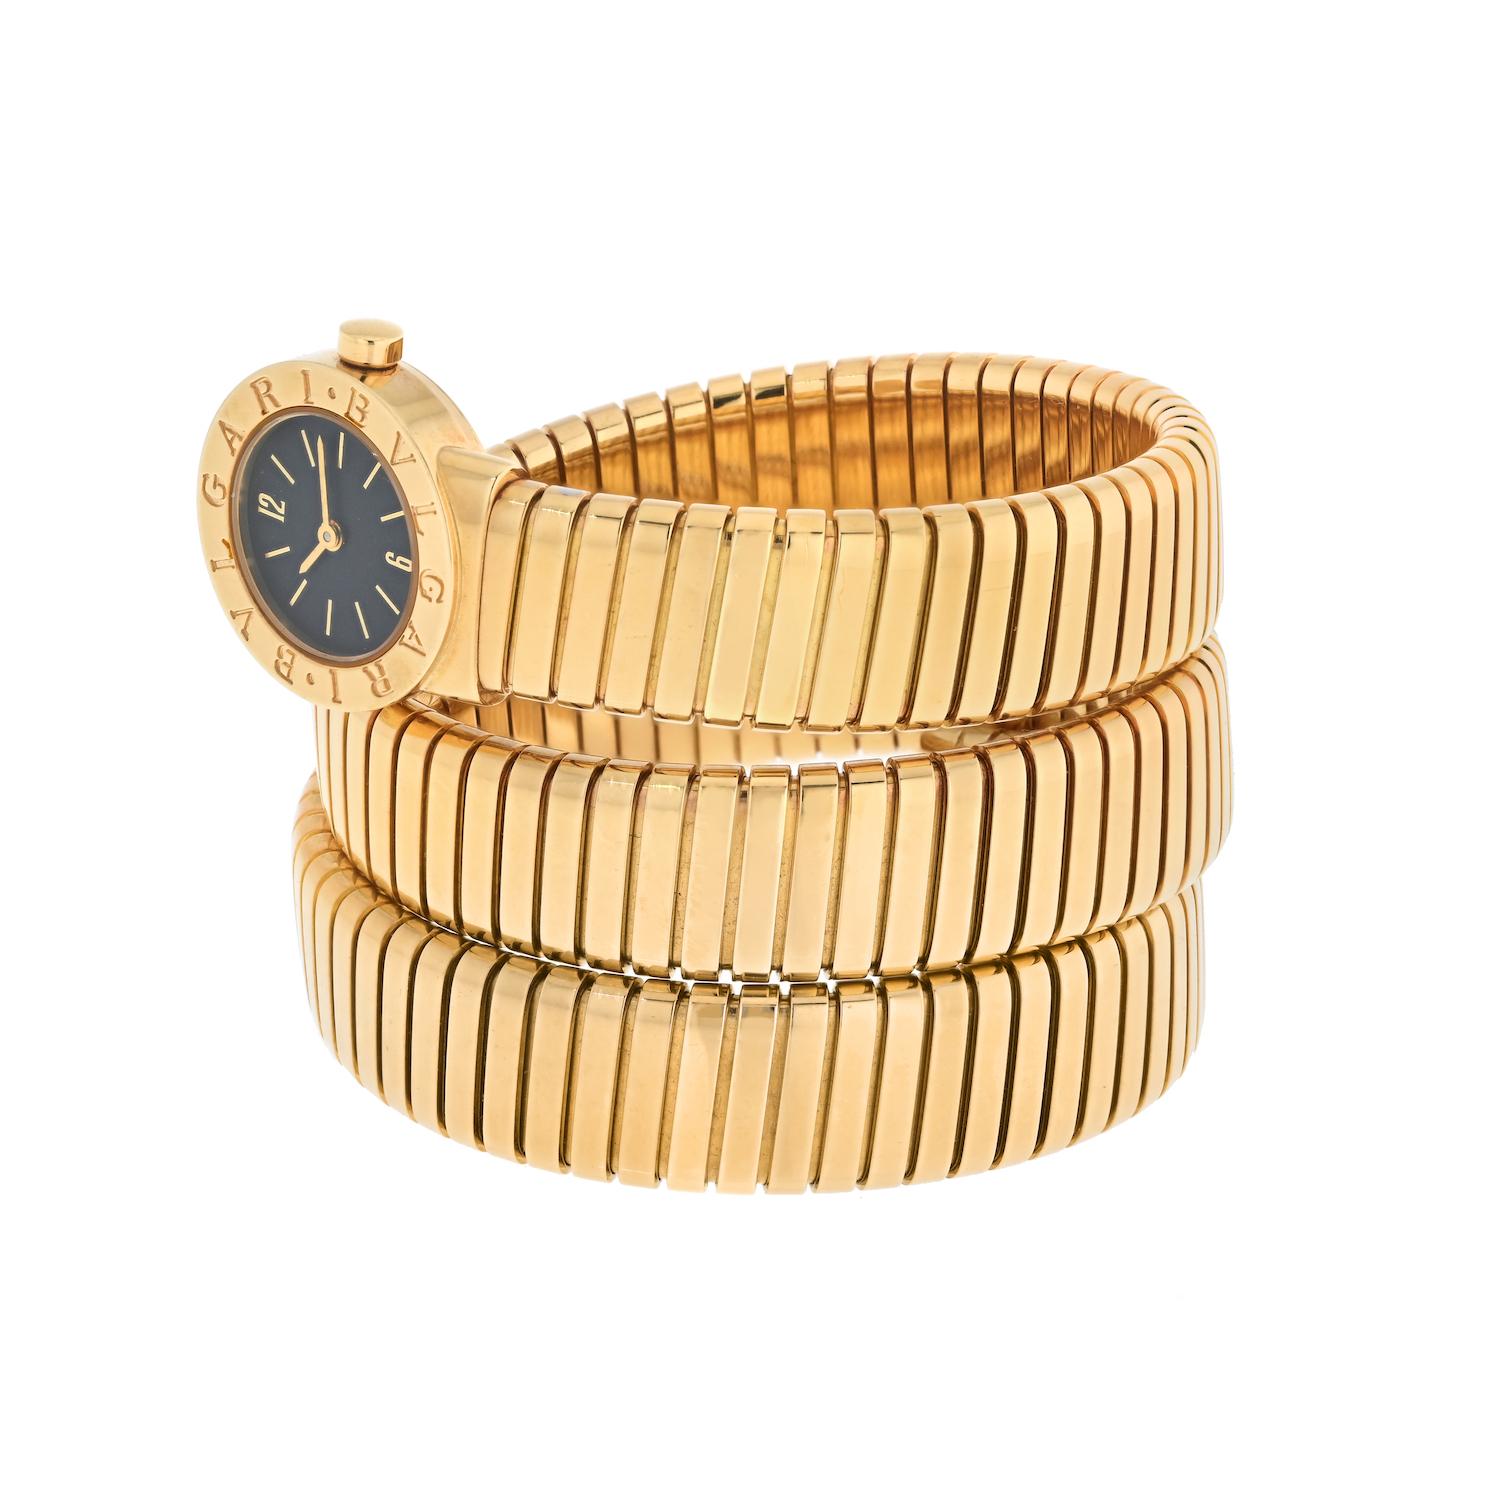 Bvlgari 18K Yellow Gold Serpenti Vintage BB19 Watch.
Bulgari’s Tubogas Snake watch is an internationally recognizable classic. Immaculately crafted from 18K yellow gold, this rare vintage timepiece features a black lacquered dial set in a 19mm frame